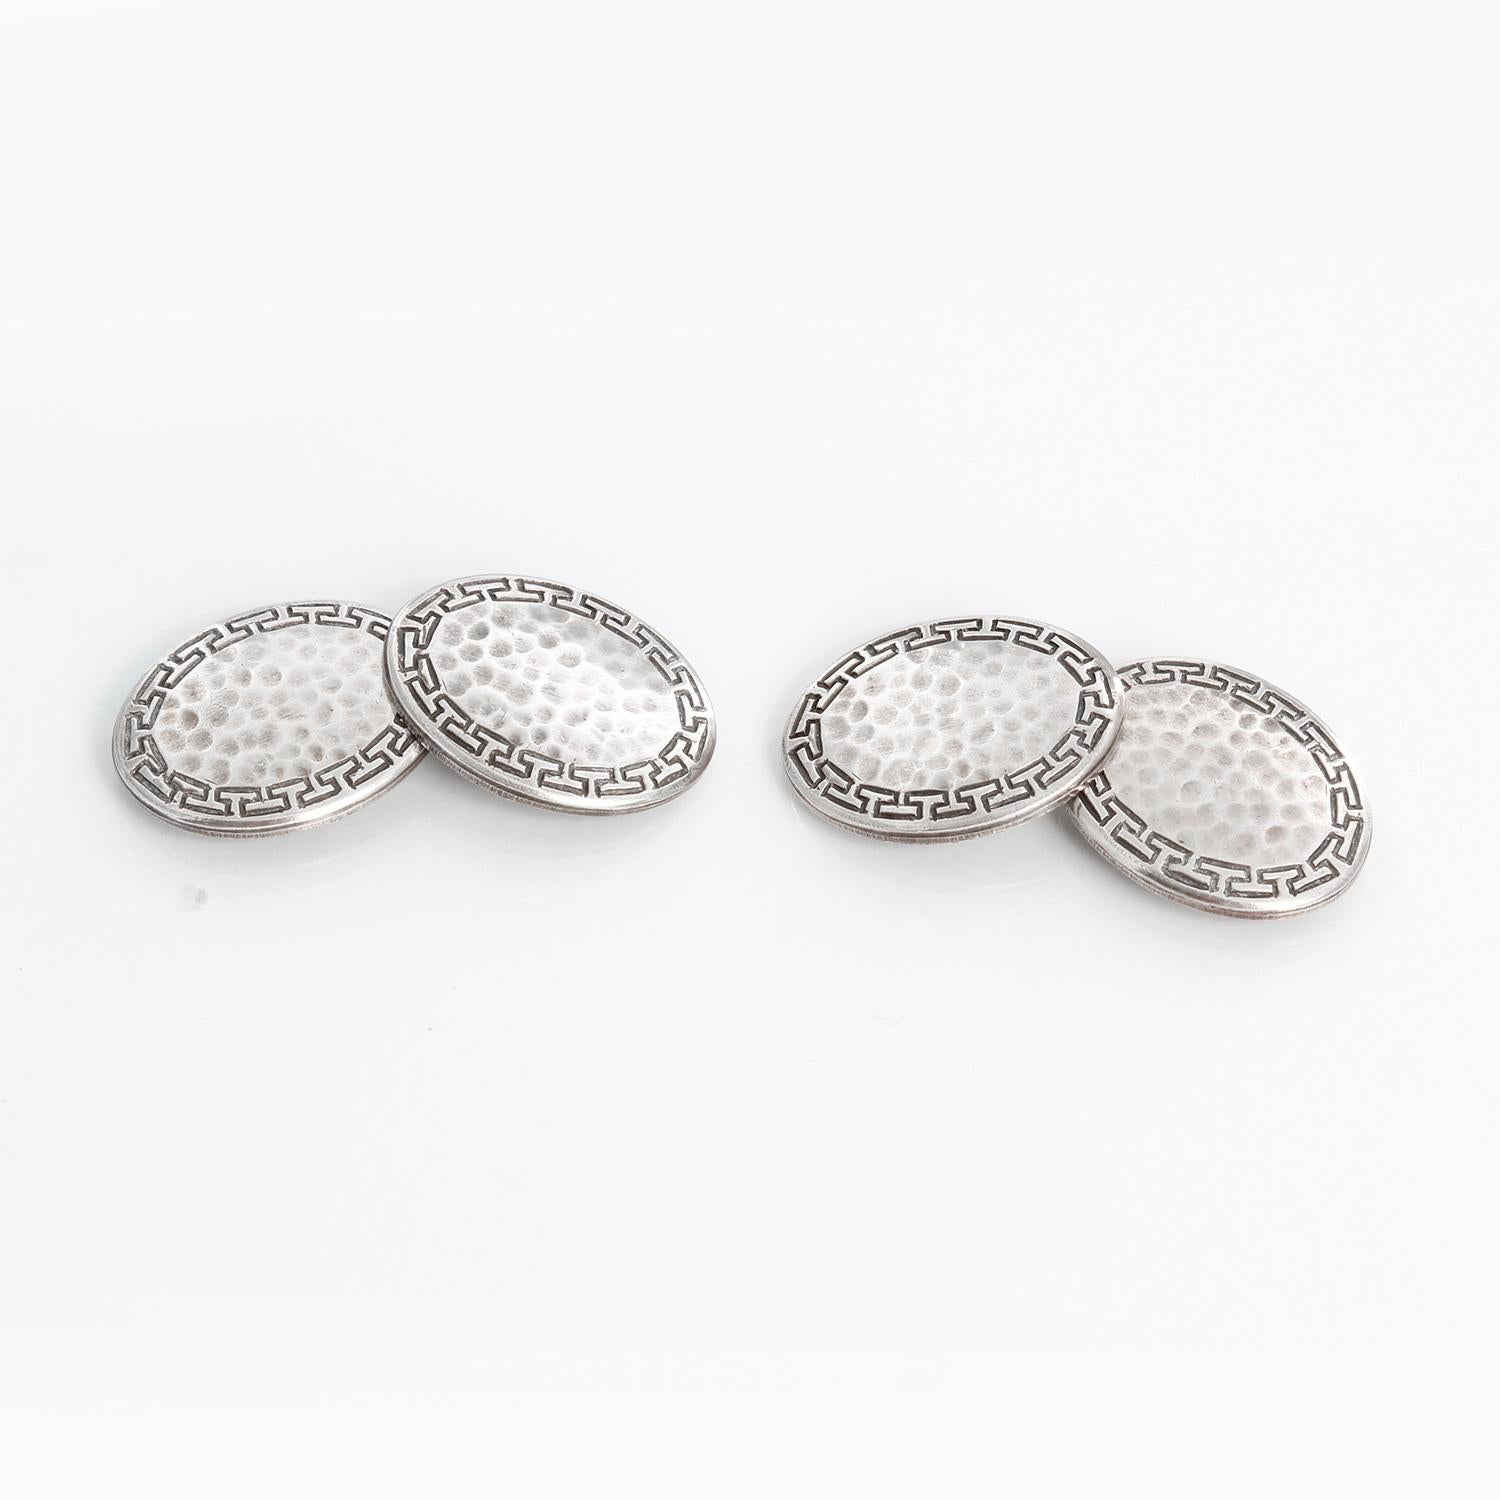 Sterling Silver Oval Cufflinks - Sterling silver oval links with black accents. Diameter 16 mm. Pre-owned with custom box. .